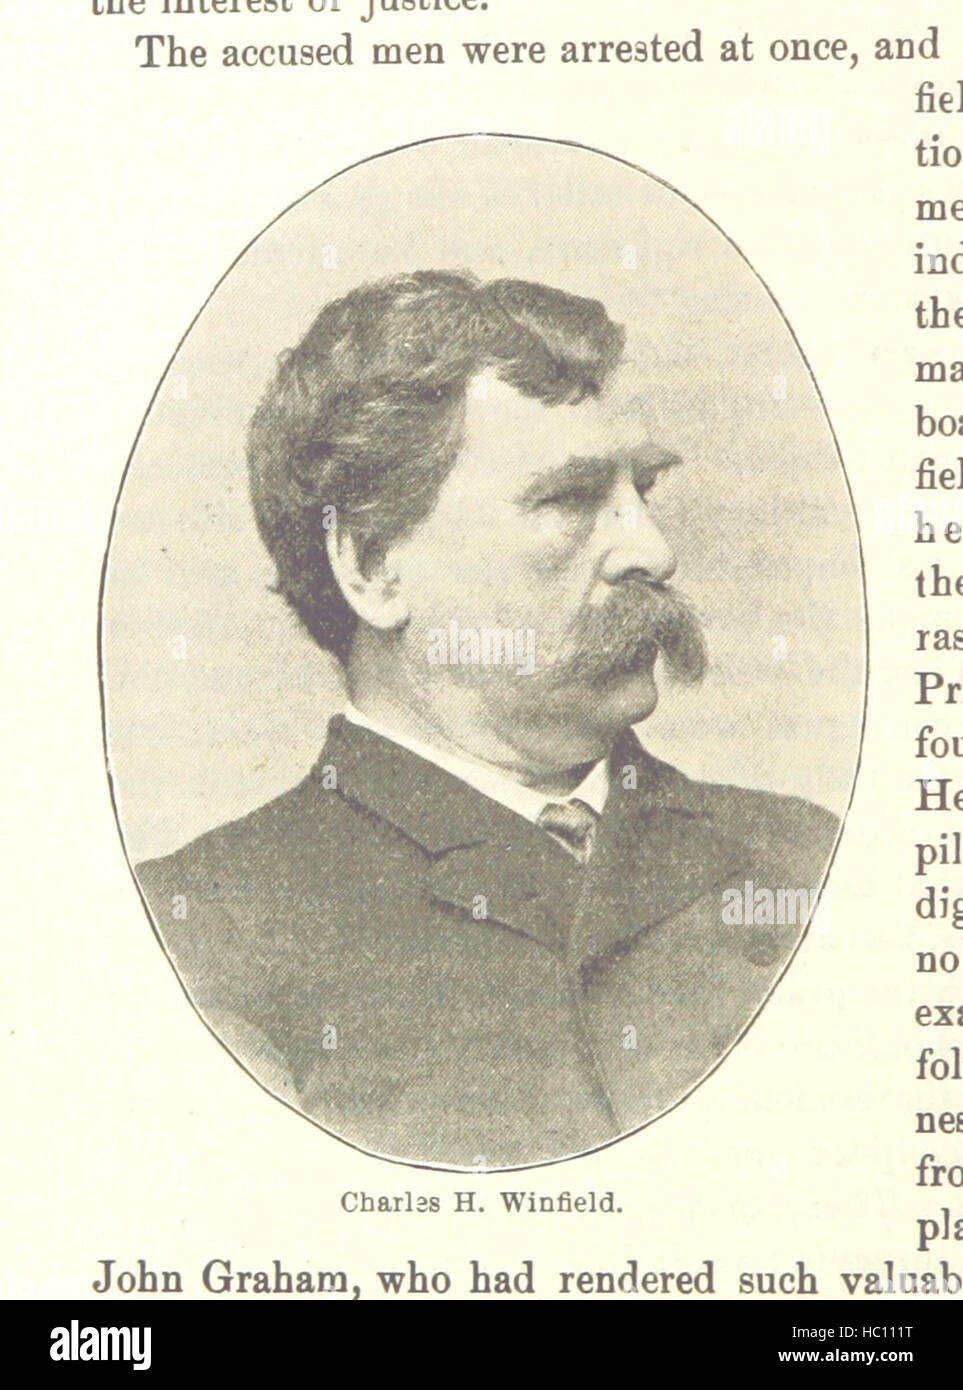 Image taken from page 346 of 'Modern Battles of Trenton. Being a history of New Jersey's politics ... from ... 1868 to ... 1894' Image taken from page 346 of 'Modern Battles of Trenton Stock Photo